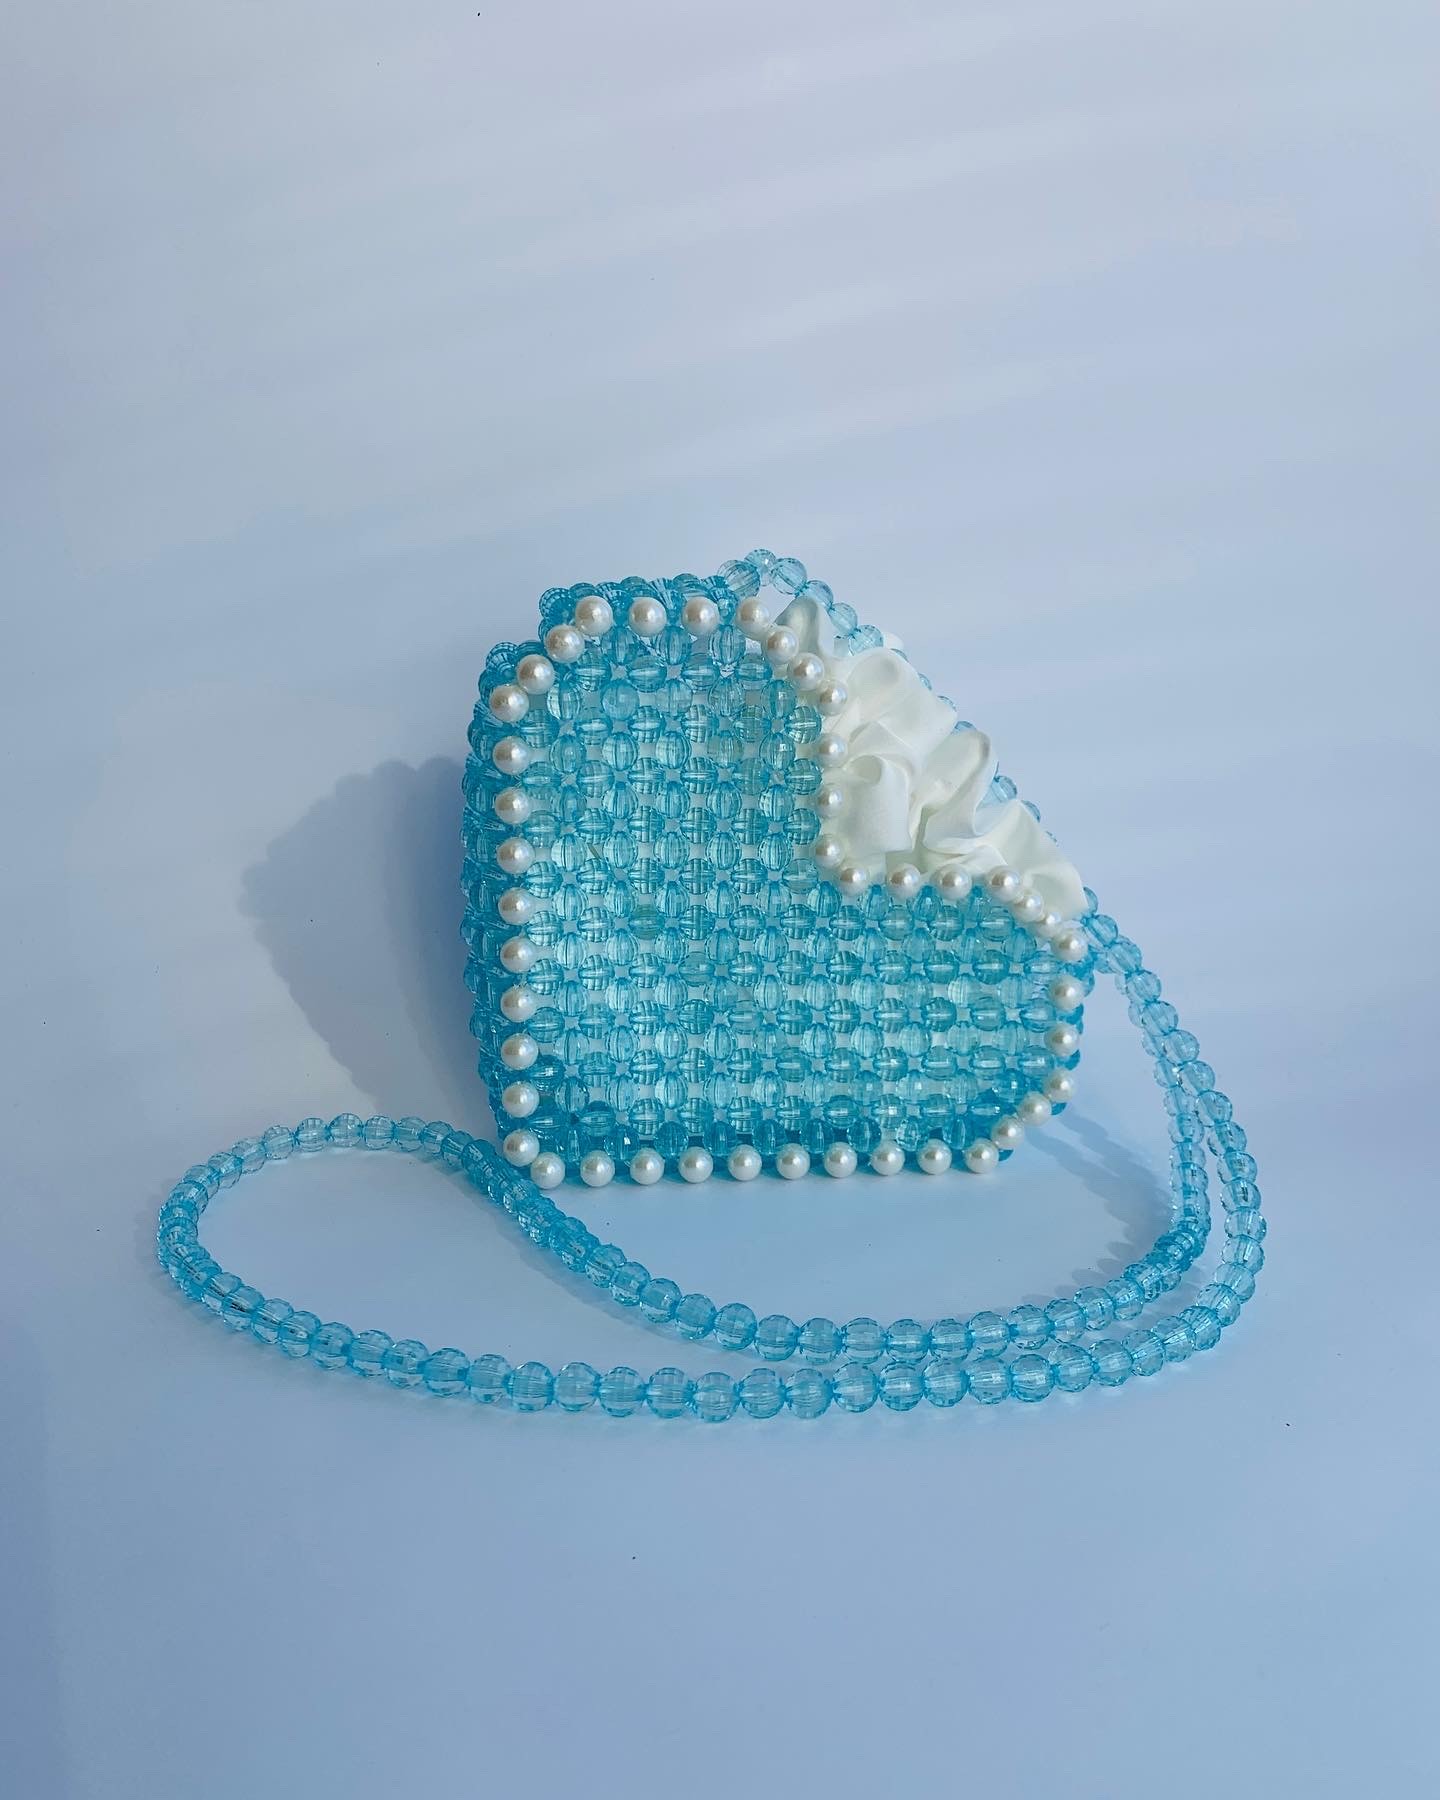 BAG made of beads over the shoulder, soft blue color, minimalism, gift for a girl, aesthetic bag